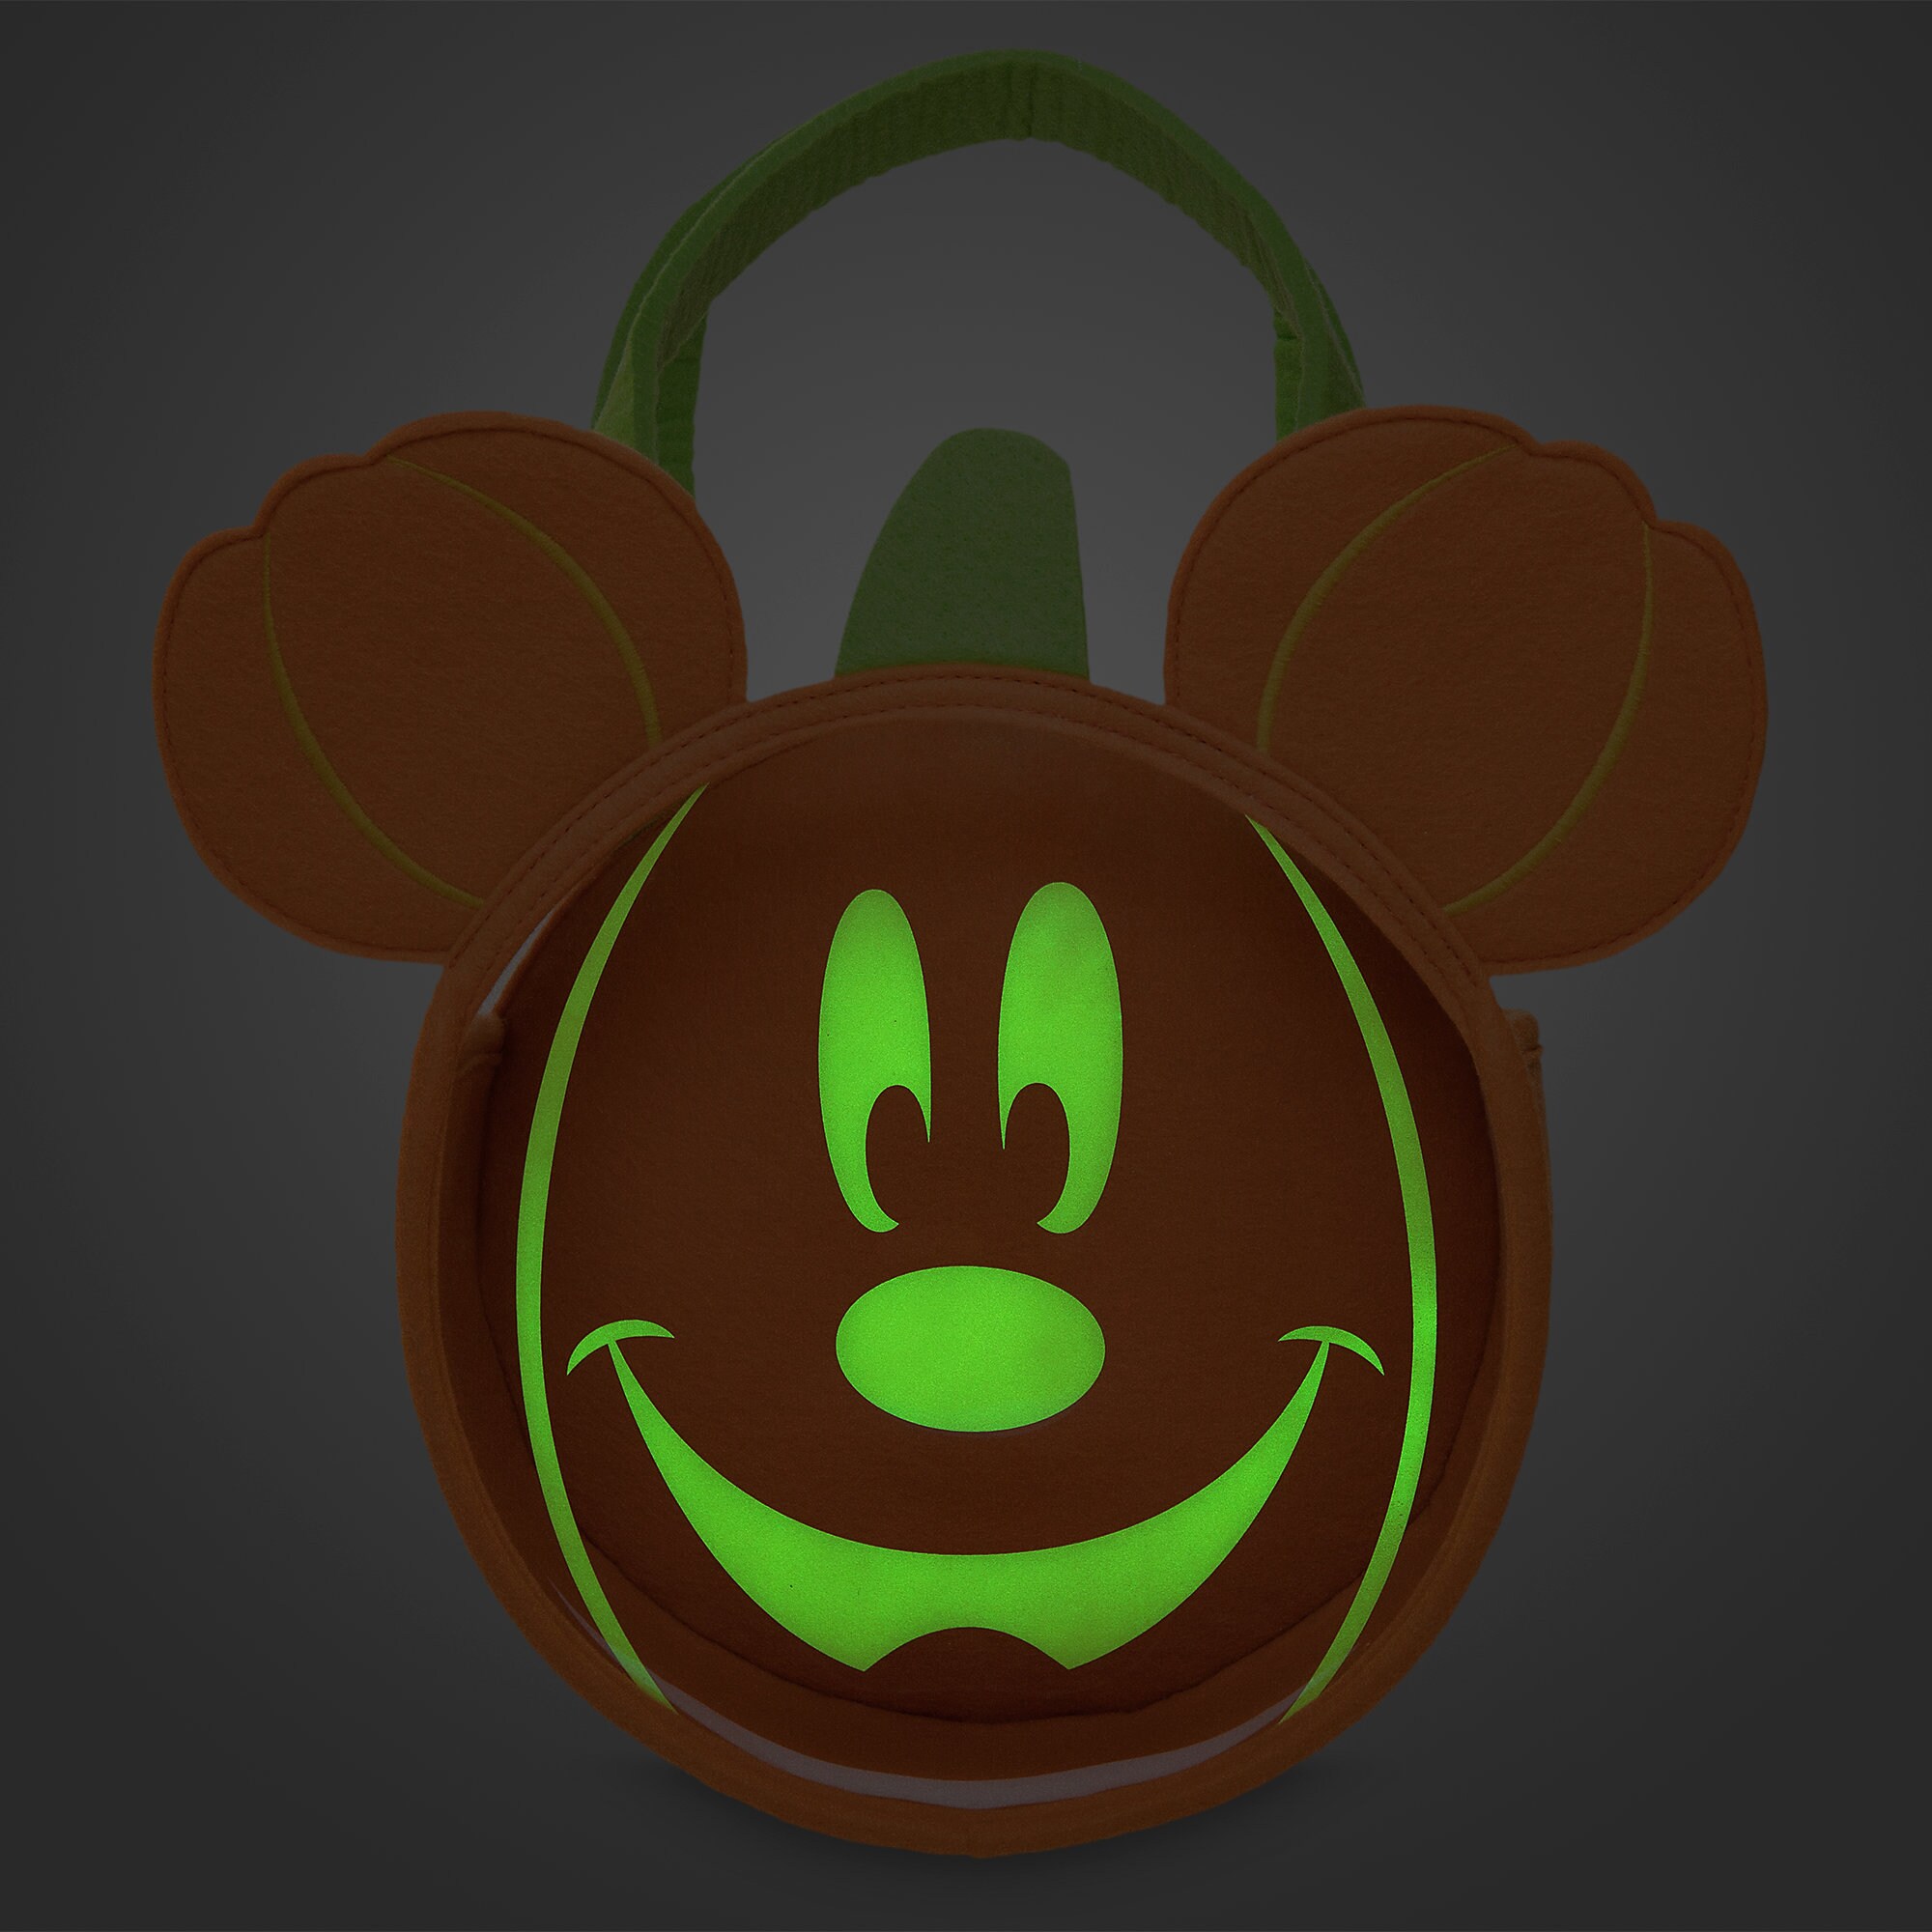 Mickey Mouse Trick or Treat Bag